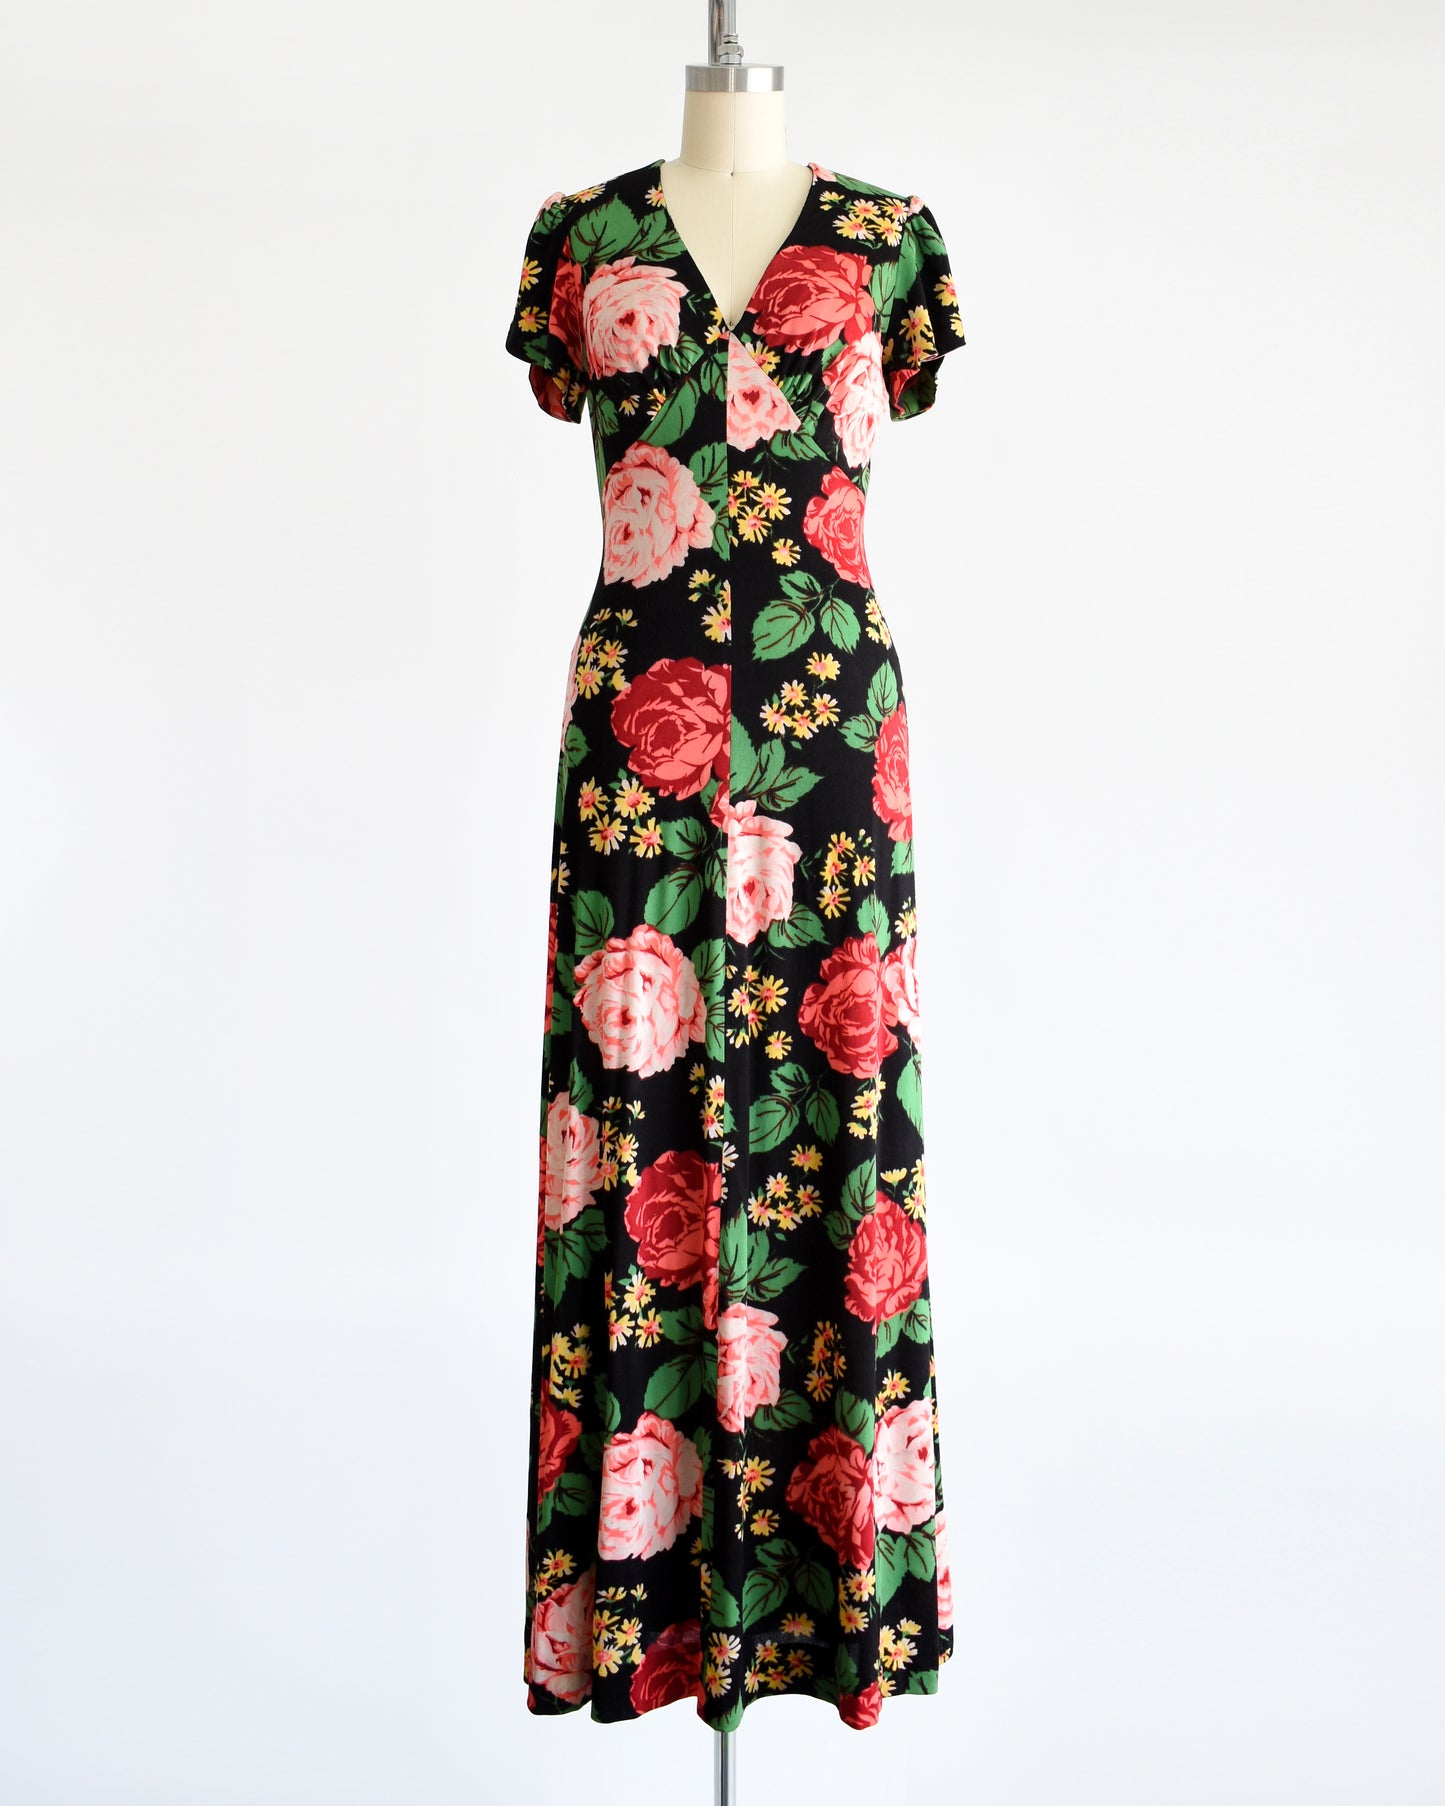 A vintage 1970s black floral maxi dress features a vibrant floral pattern of red and pink roses, green leaves, and yellow and orange daisies. 